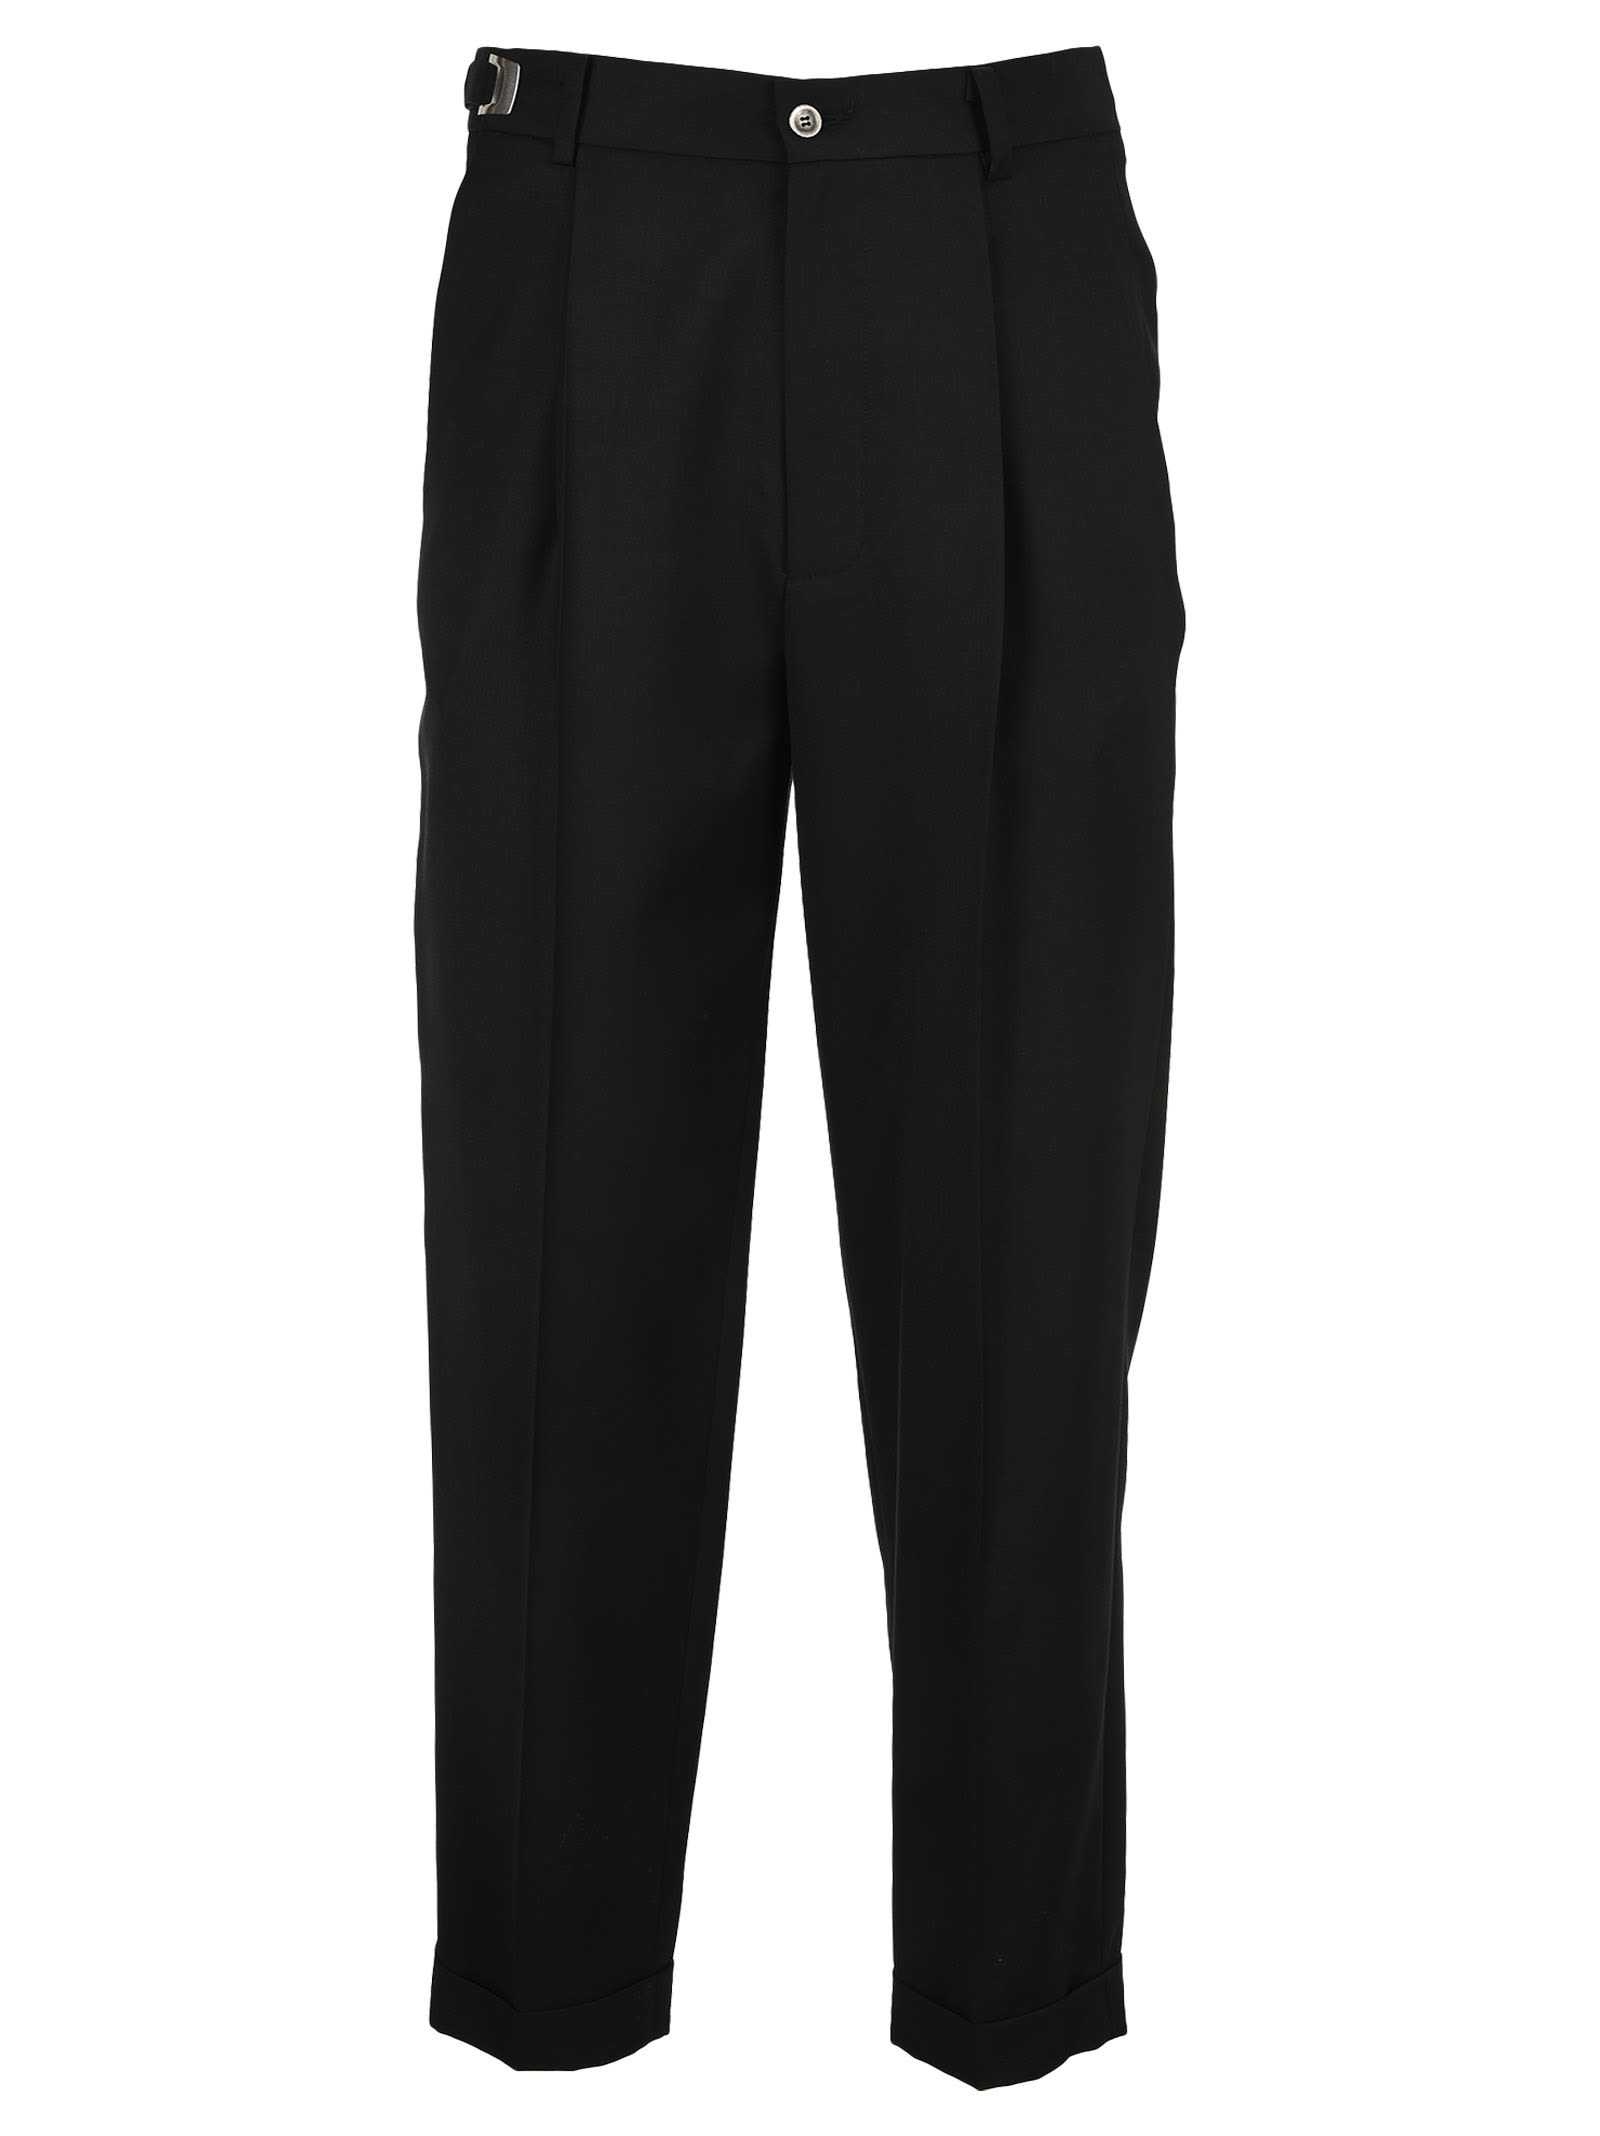 MAGLIANO BLACK CLASSIC PIENCE TROPICAL TROUSERS,11904411